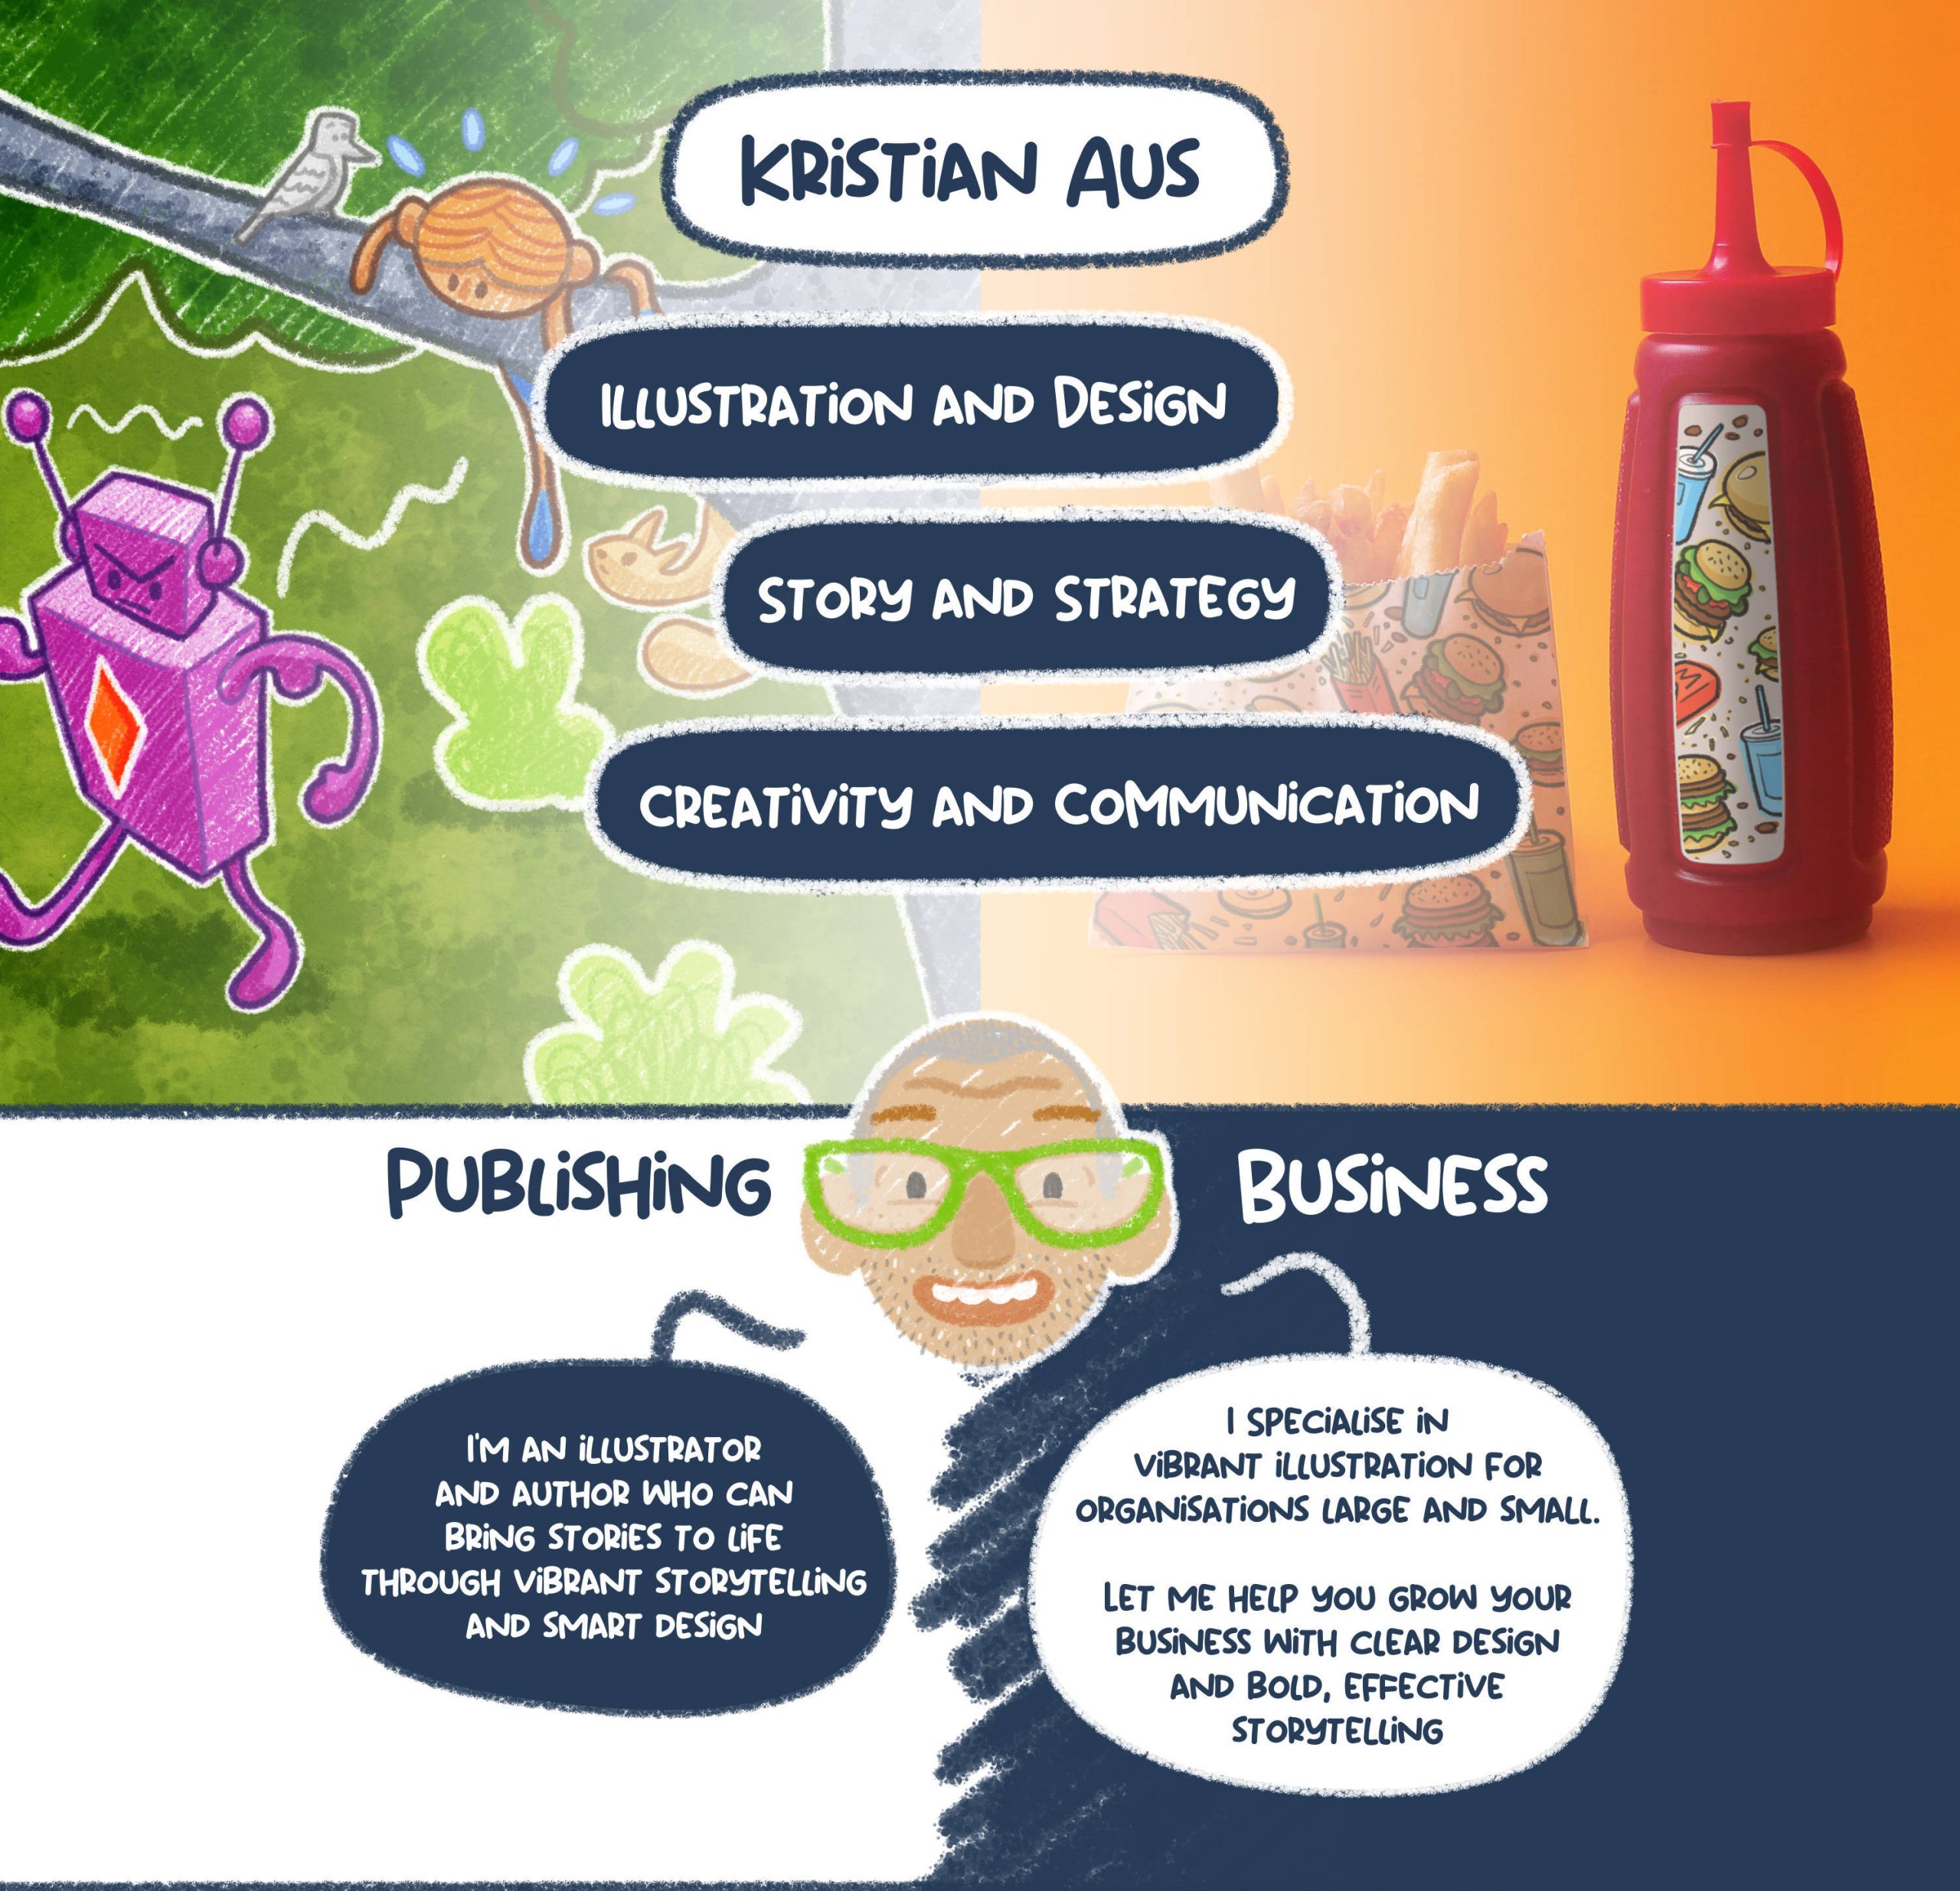 Kristian Aus specialises in vibrant illustration and design for organisations large and small. He can help you grow your business with clear design and bold, effective storytelling.